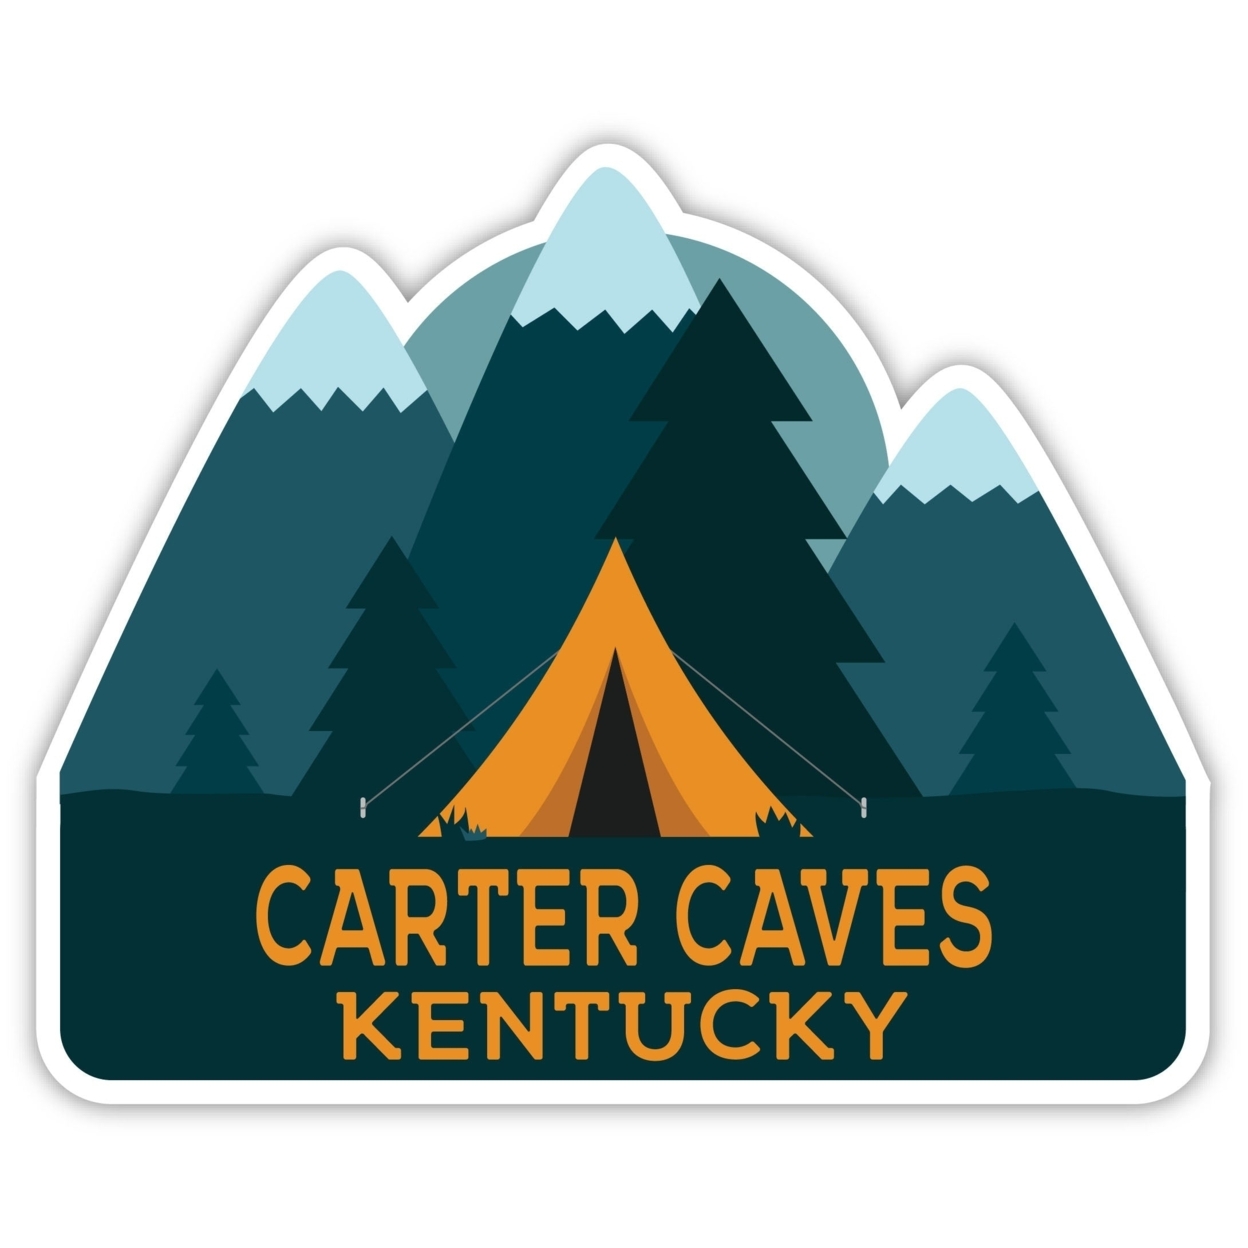 Carter Caves Kentucky Souvenir Decorative Stickers (Choose Theme And Size) - 4-Pack, 6-Inch, Tent